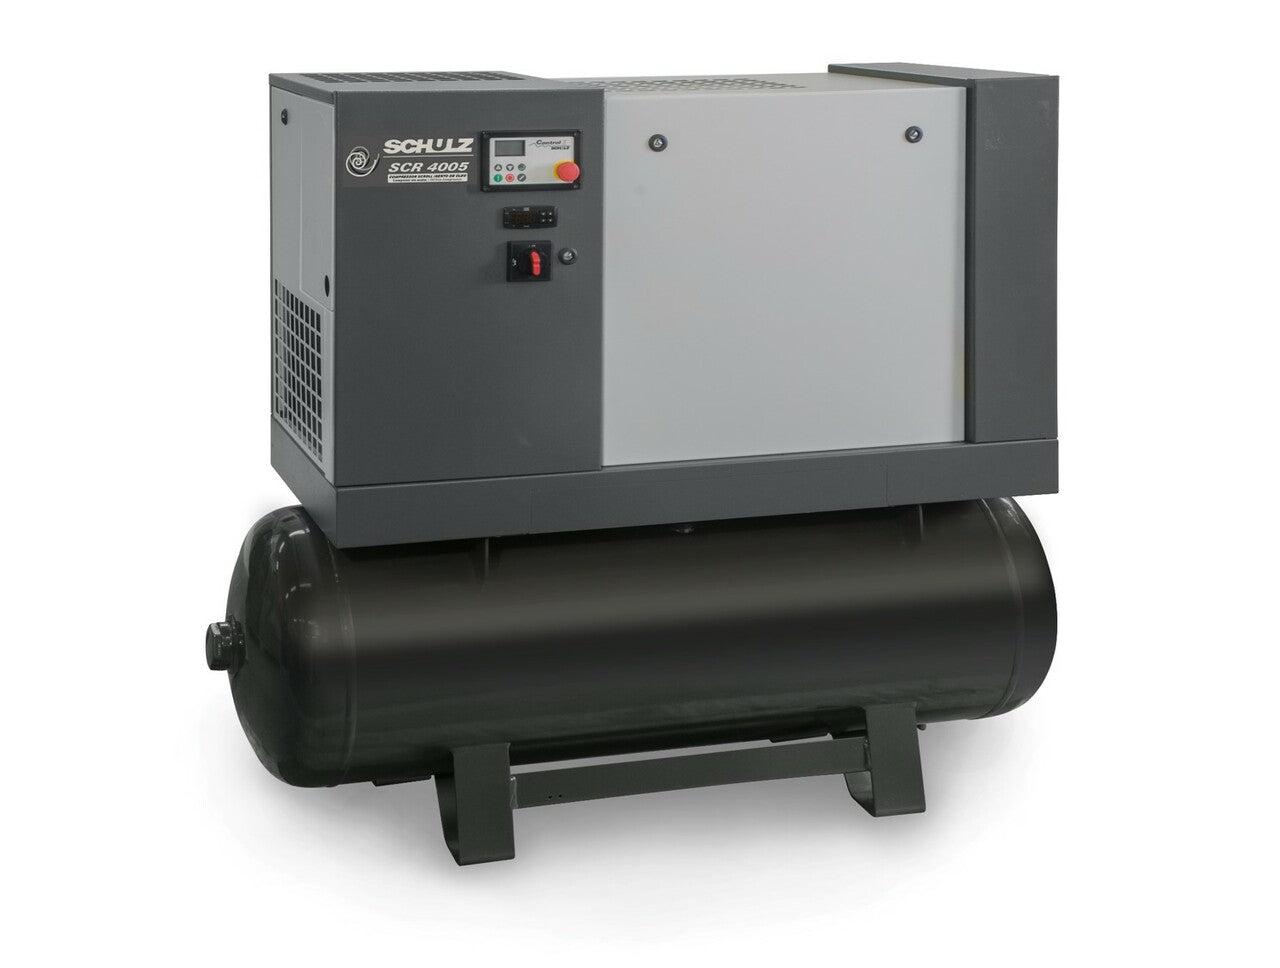 Schulz of America SCR 4005 TS 116 PSI @ 12.5 CFM 230V Single Phase Cabinetized Scroll Compressor - Base Mounted w/ Fan Cooled Aftercooler, Pre-filter & Dryer (PLC Controlled)